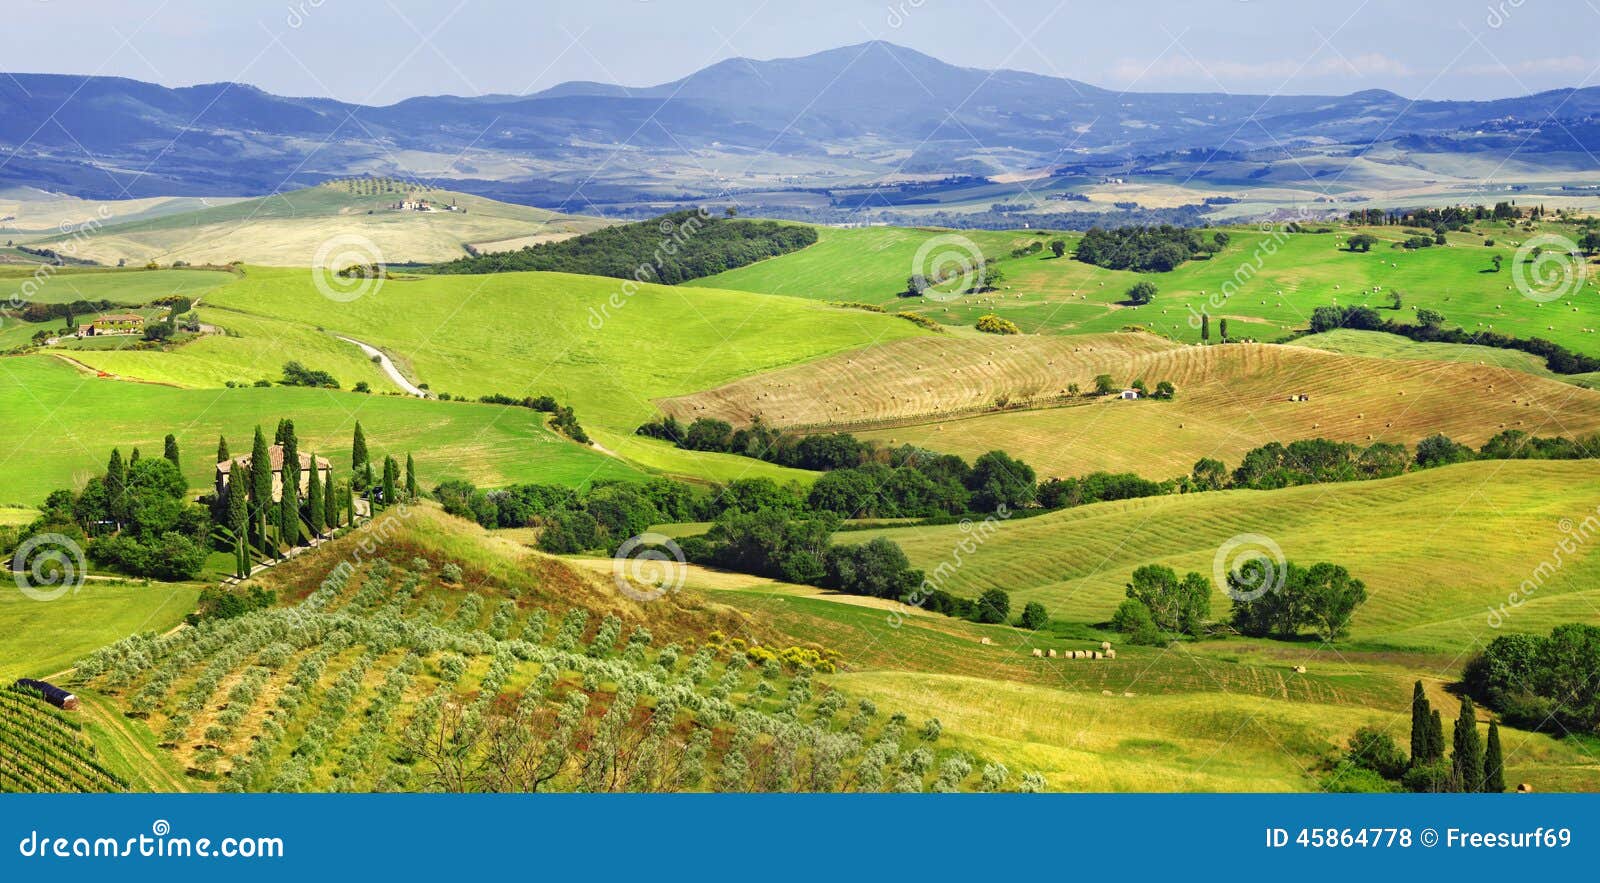 landscapes of tuscany, val d'orcia